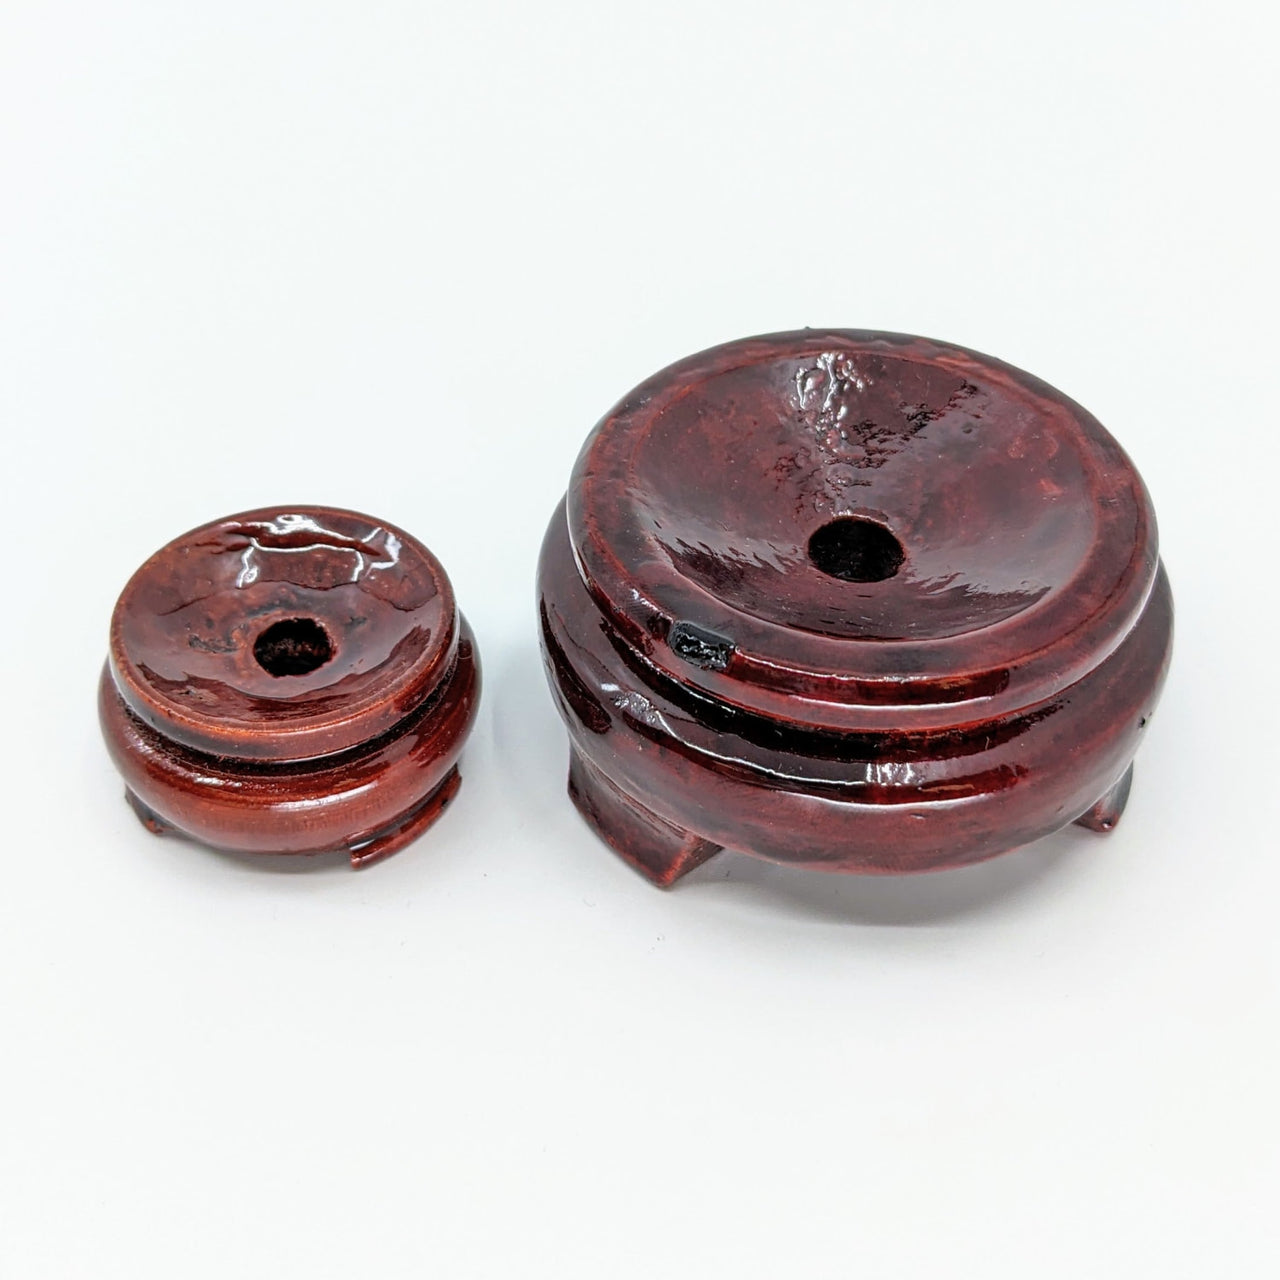 Two red glass jars on Sphere Holder - Resin Fancy Rosewood Finish Stand #LV2725